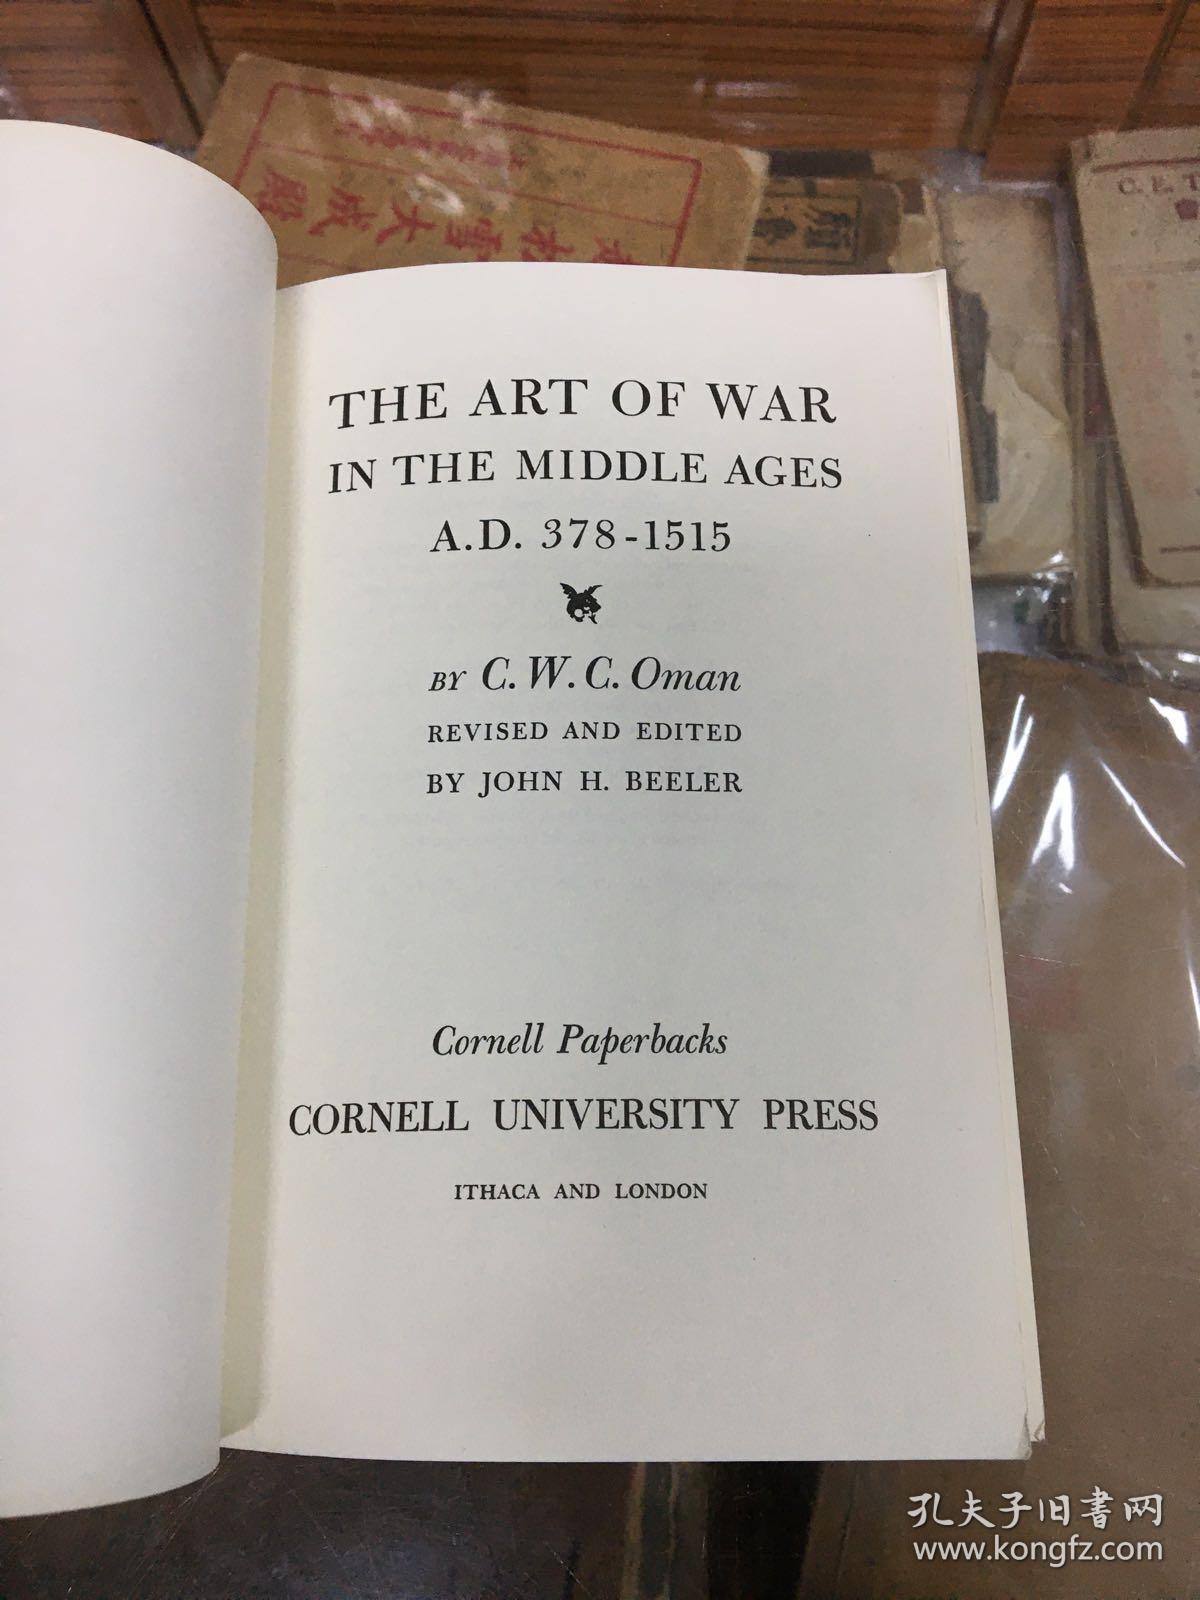 The Art of War in the Middle Ages: A.D. 378–1515    中世纪战争艺术：公元378至1515年  (英）查尔斯·欧曼